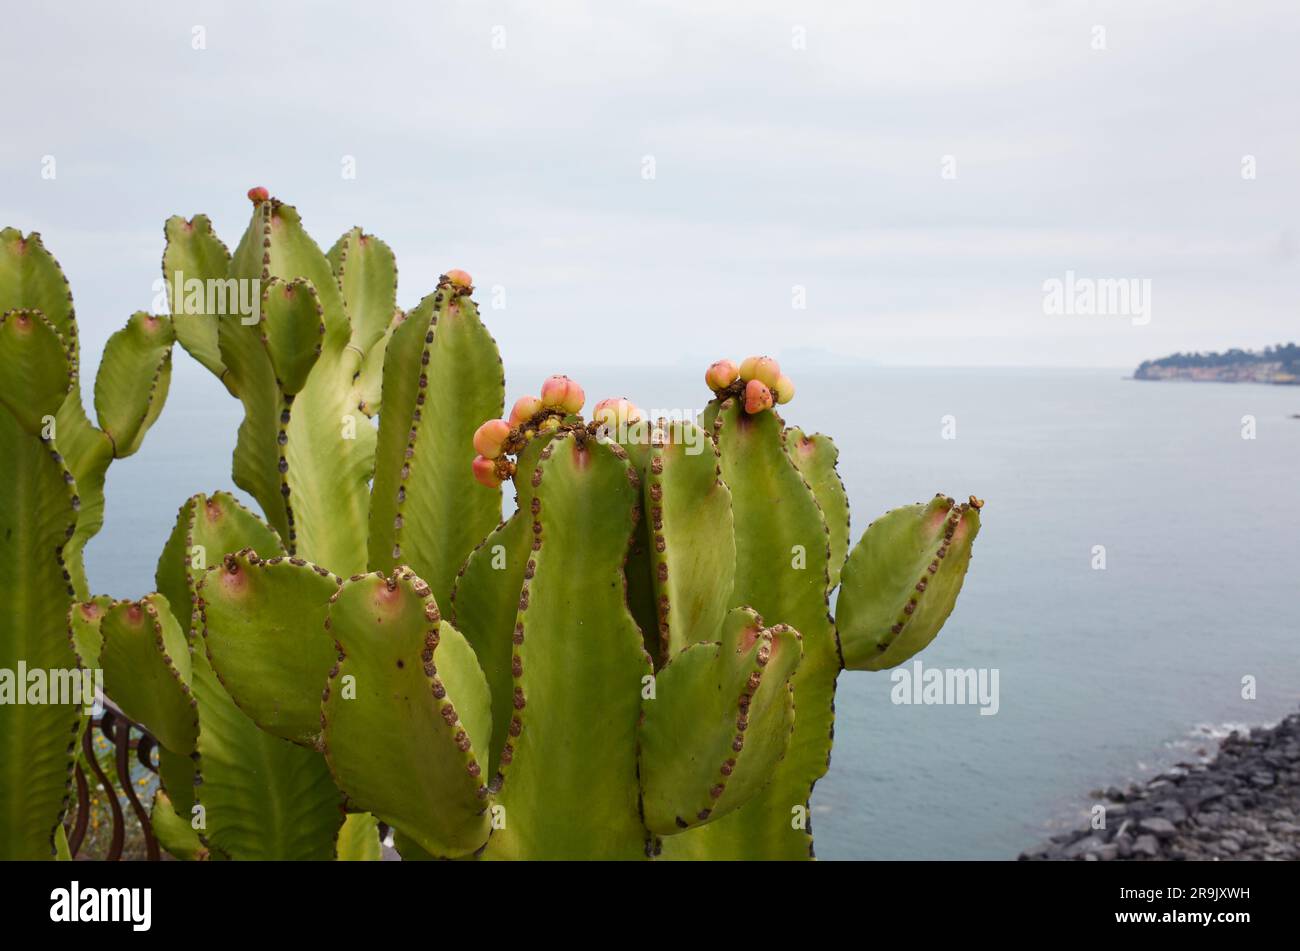 Euphorbia abyssinica branch close up Stock Photo